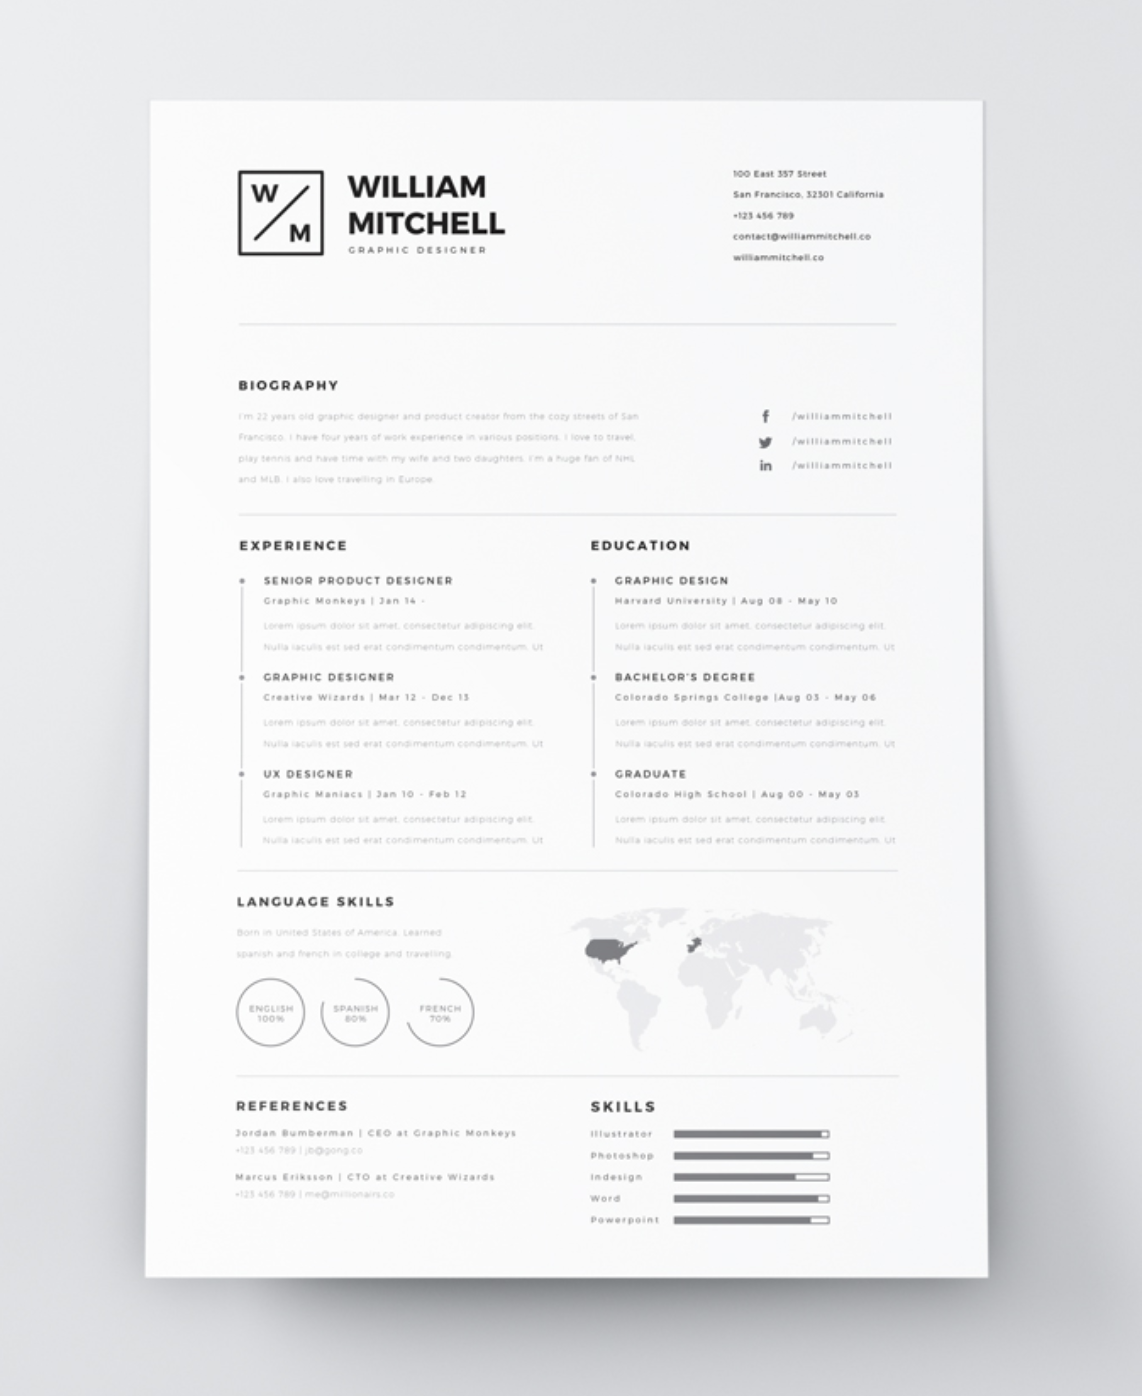 Indesign Resume Template Screen Shot 2018 12 14 At 11 00 49 Am indesign resume template|wikiresume.com